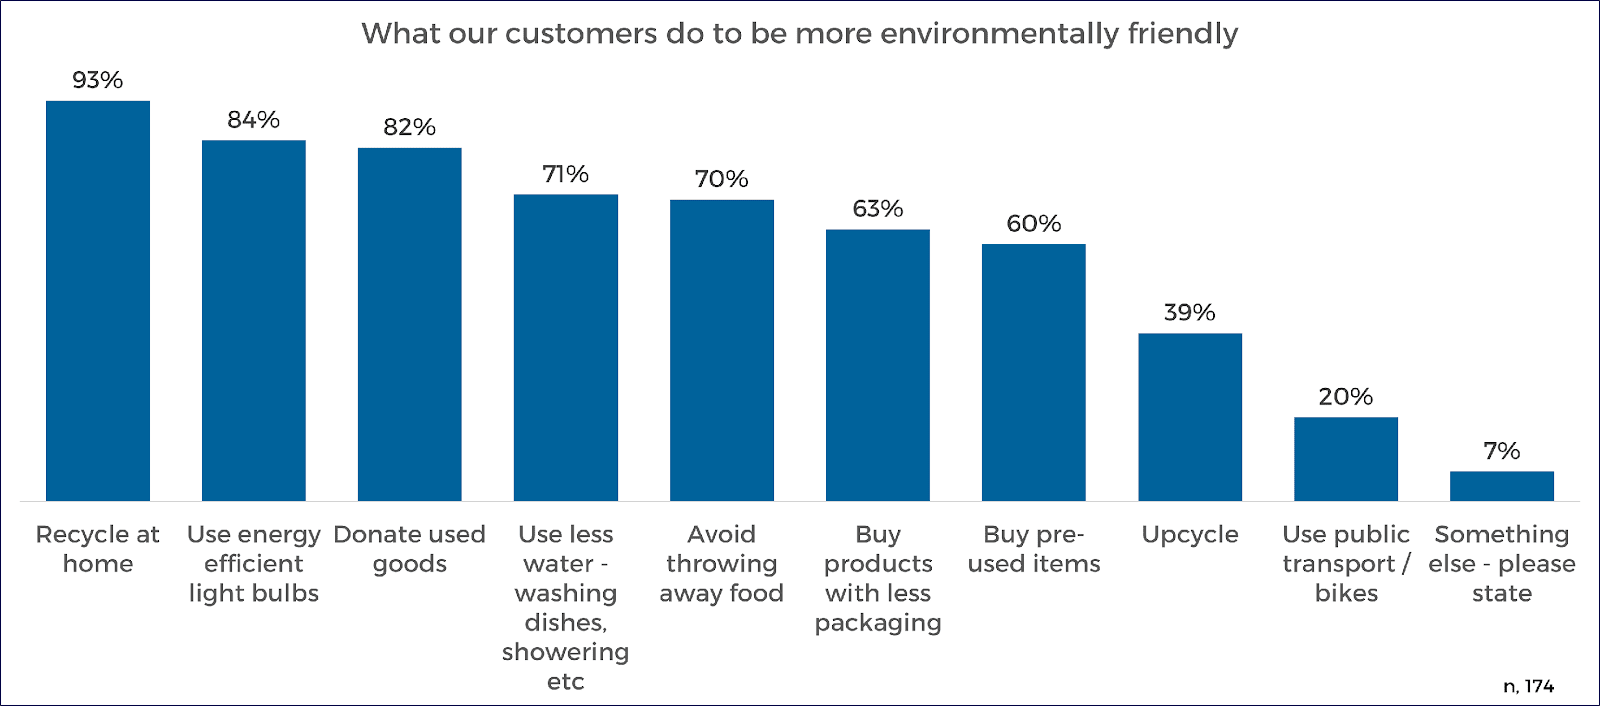 A graph showing what our customers do to be more environmentally friendly.